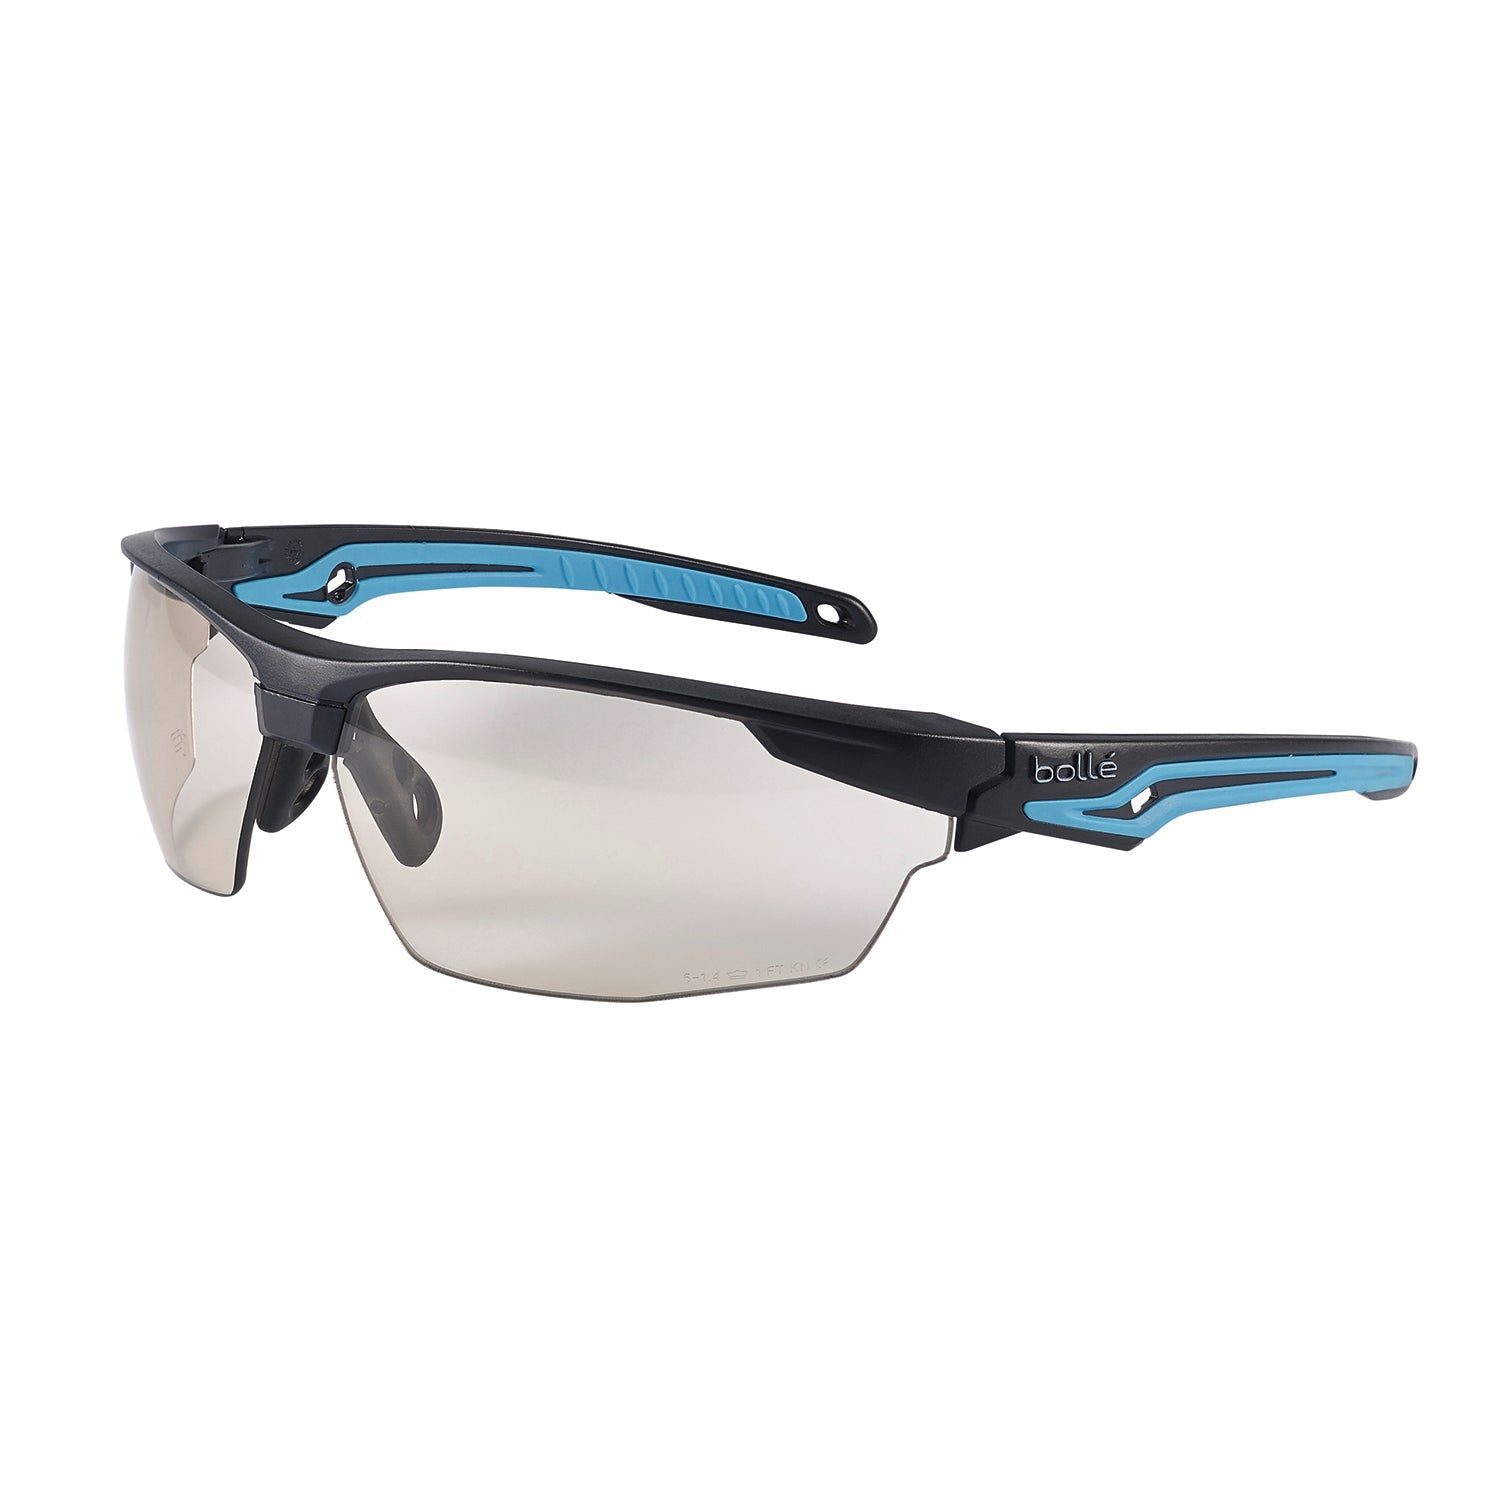 Bolle TRYON TRYOCSP Safety Glasses CSP Lens